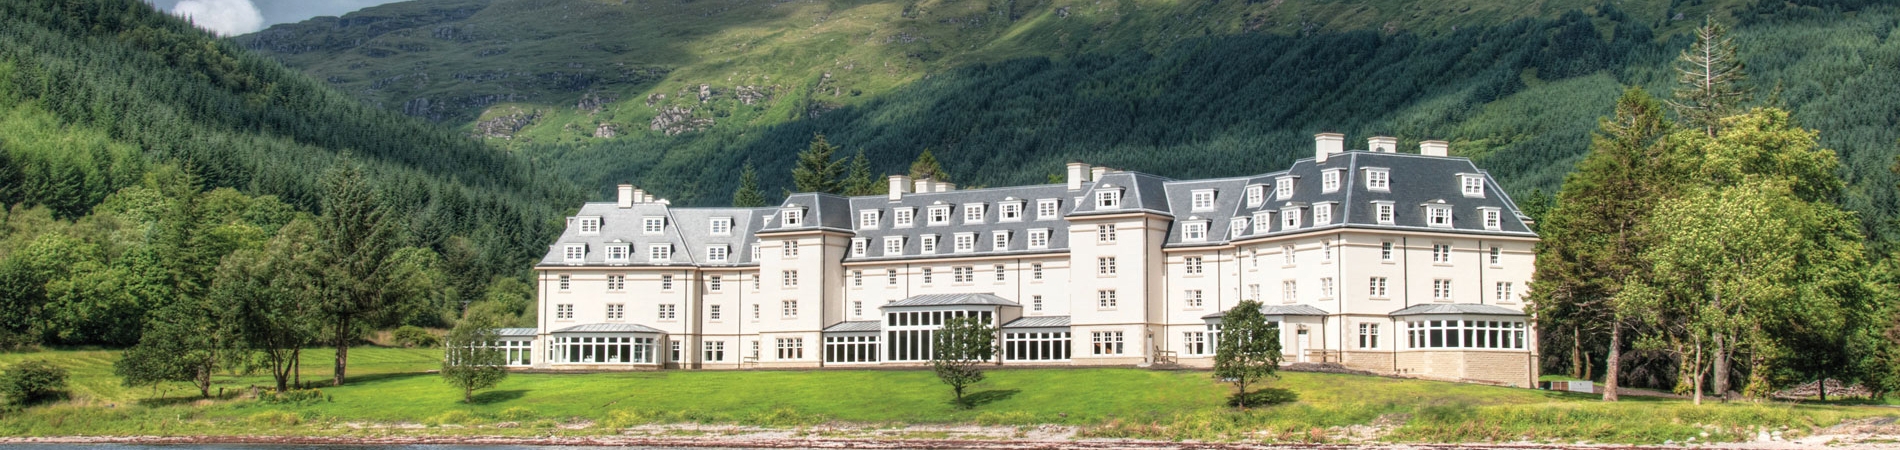 Ardgartan Hotel overlooked by the Arrochar Alps. Another gorgeous Lochs & Glens hotel